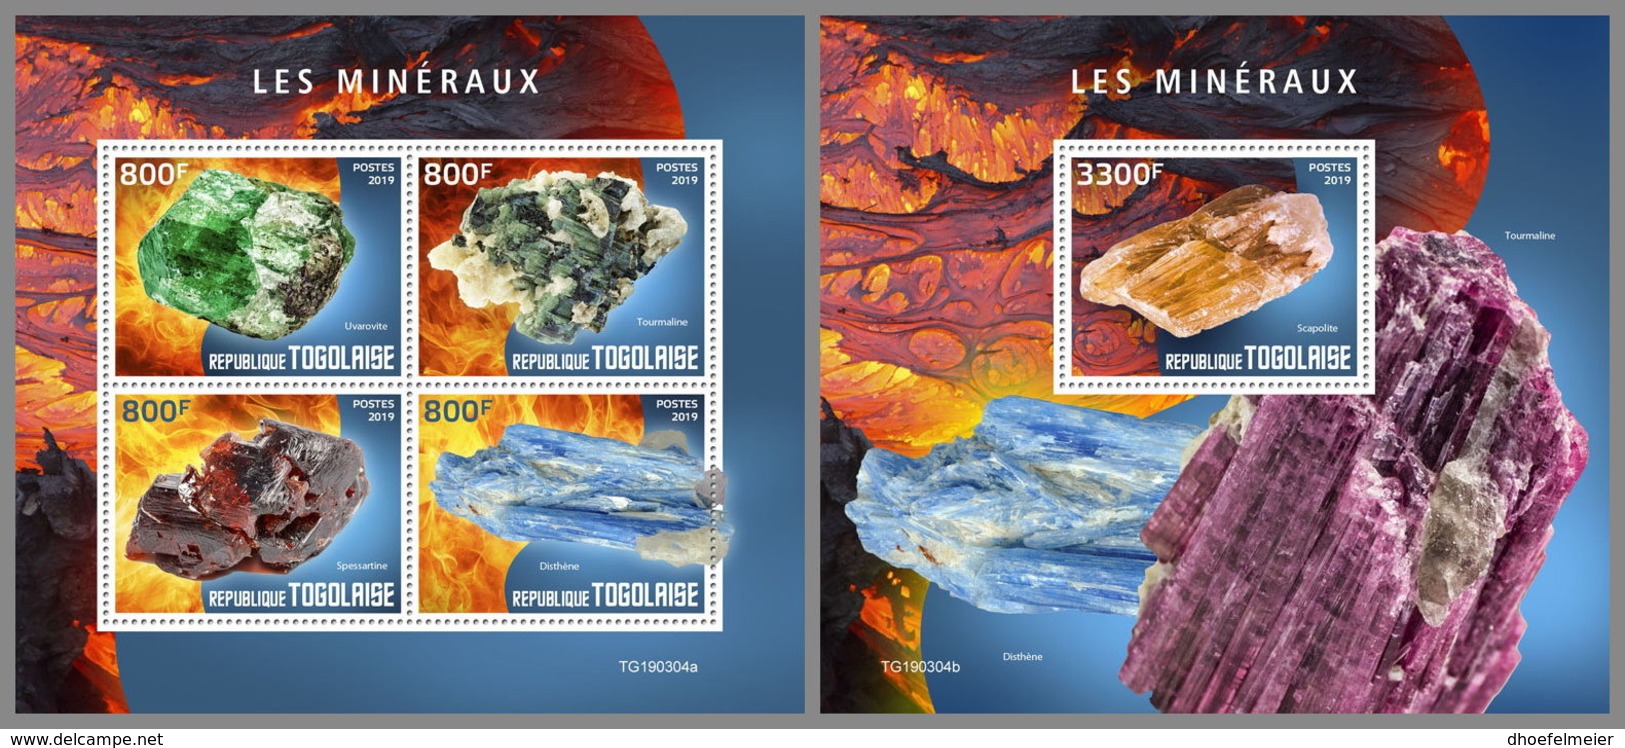 TOGO 2019 MNH Minerals Mineralien Mineraux M/S+S/S - OFFICIAL ISSUE - DH1933 - Minerals